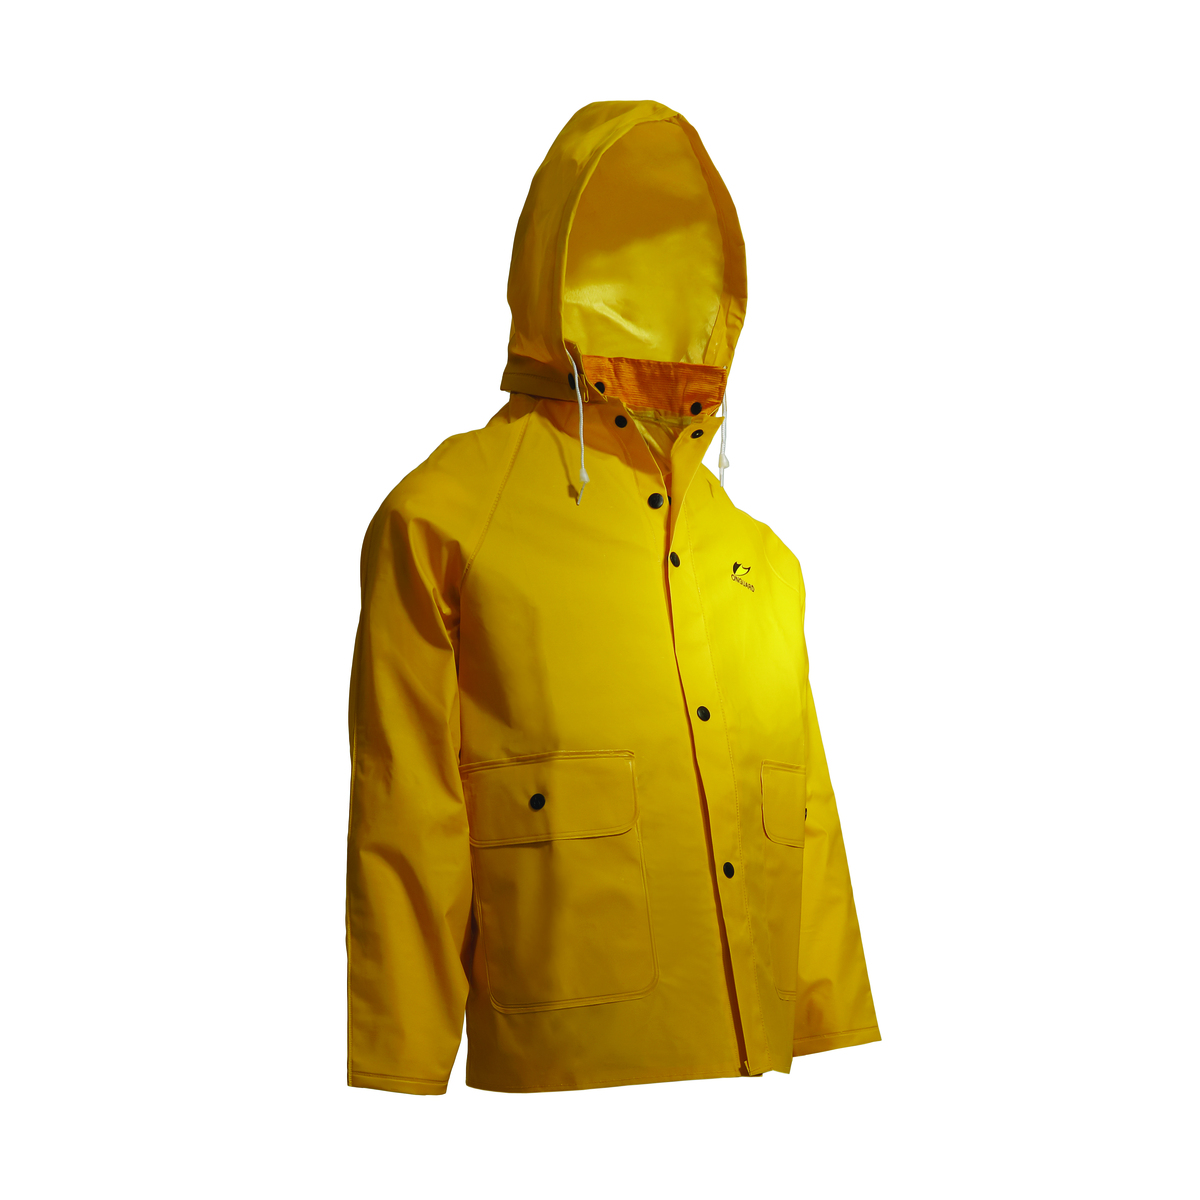 Dunlop® Protective Footwear Small Yellow Sitex .35 mm Polyester/PVC Rain Jacket With Detachable Hood